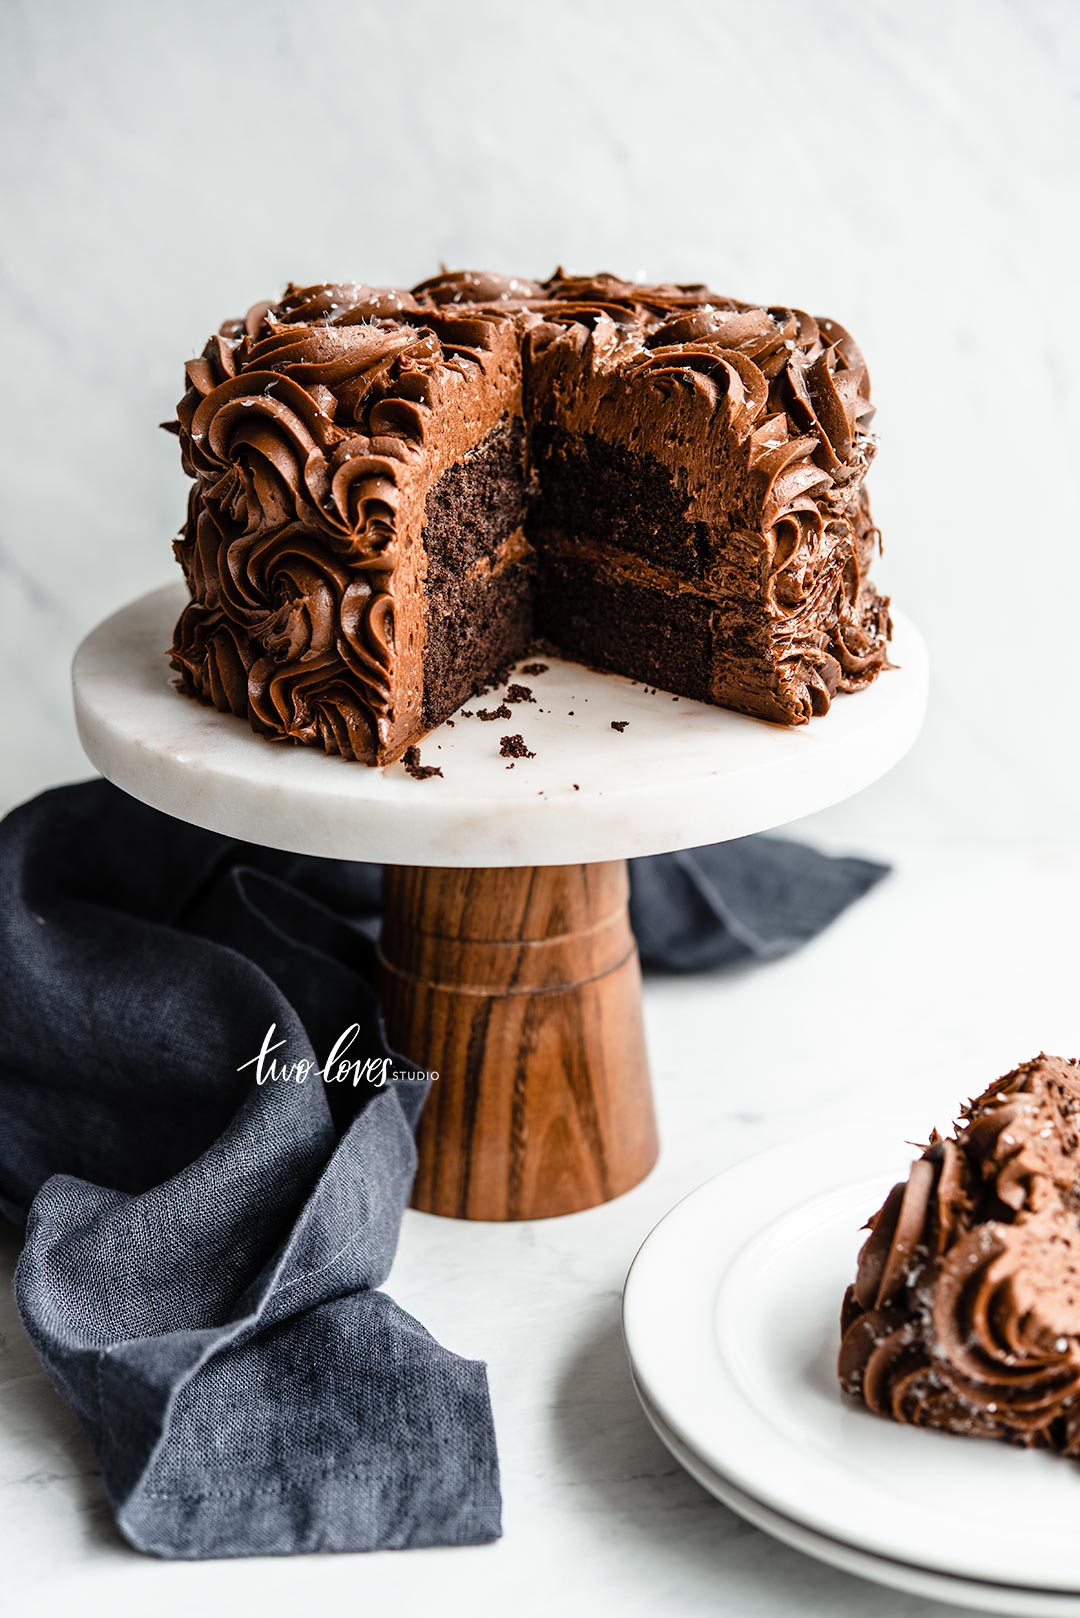 Chocolate cake on a white cake stand, slice of cake and a blue napkin on the side. Demonstrating a narrow lens for straight lines.